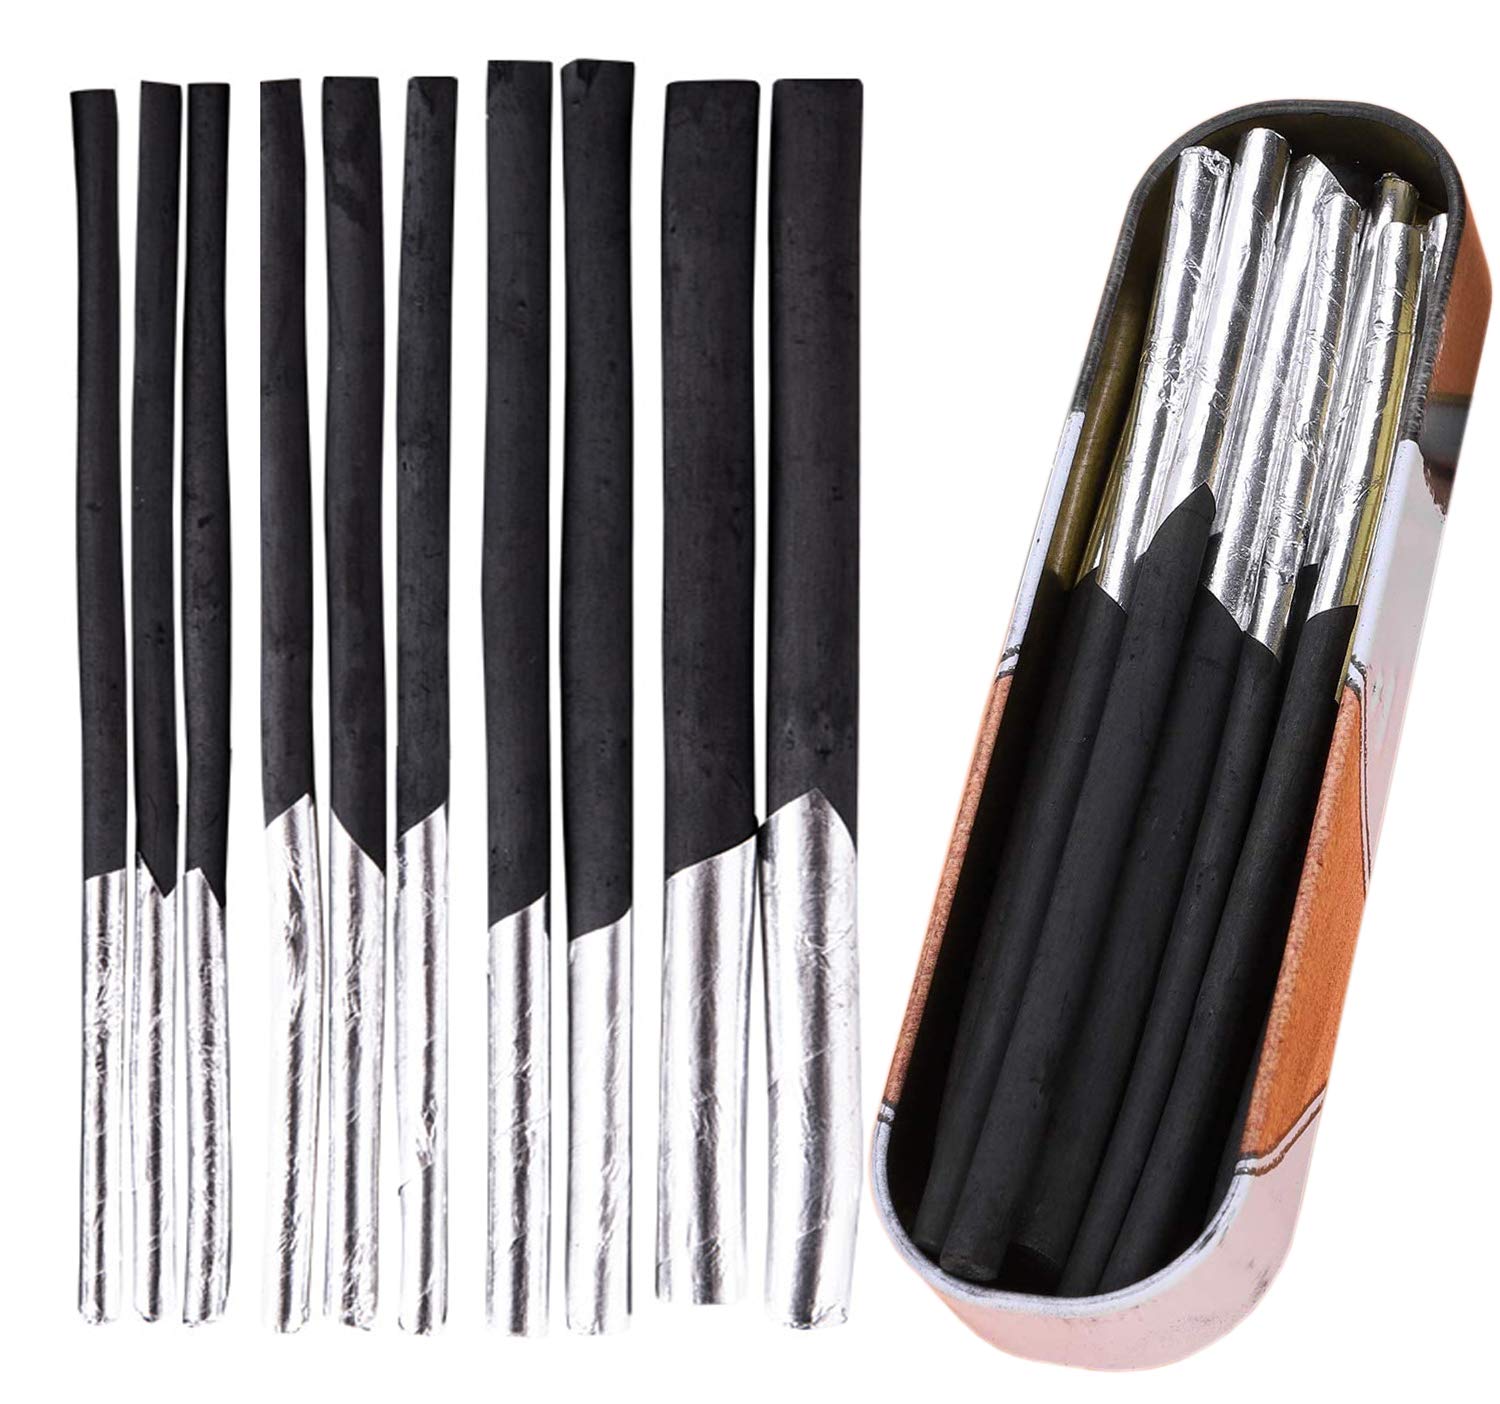 10pcs Vine Charcoal Sticks Willow Artist Soft Charcoal Pencil Sticks  Drawing Art Set in Tin Box 4 Sizes Charcoal Drawing Chalks Art Medium for  Sketching Drawing Shading